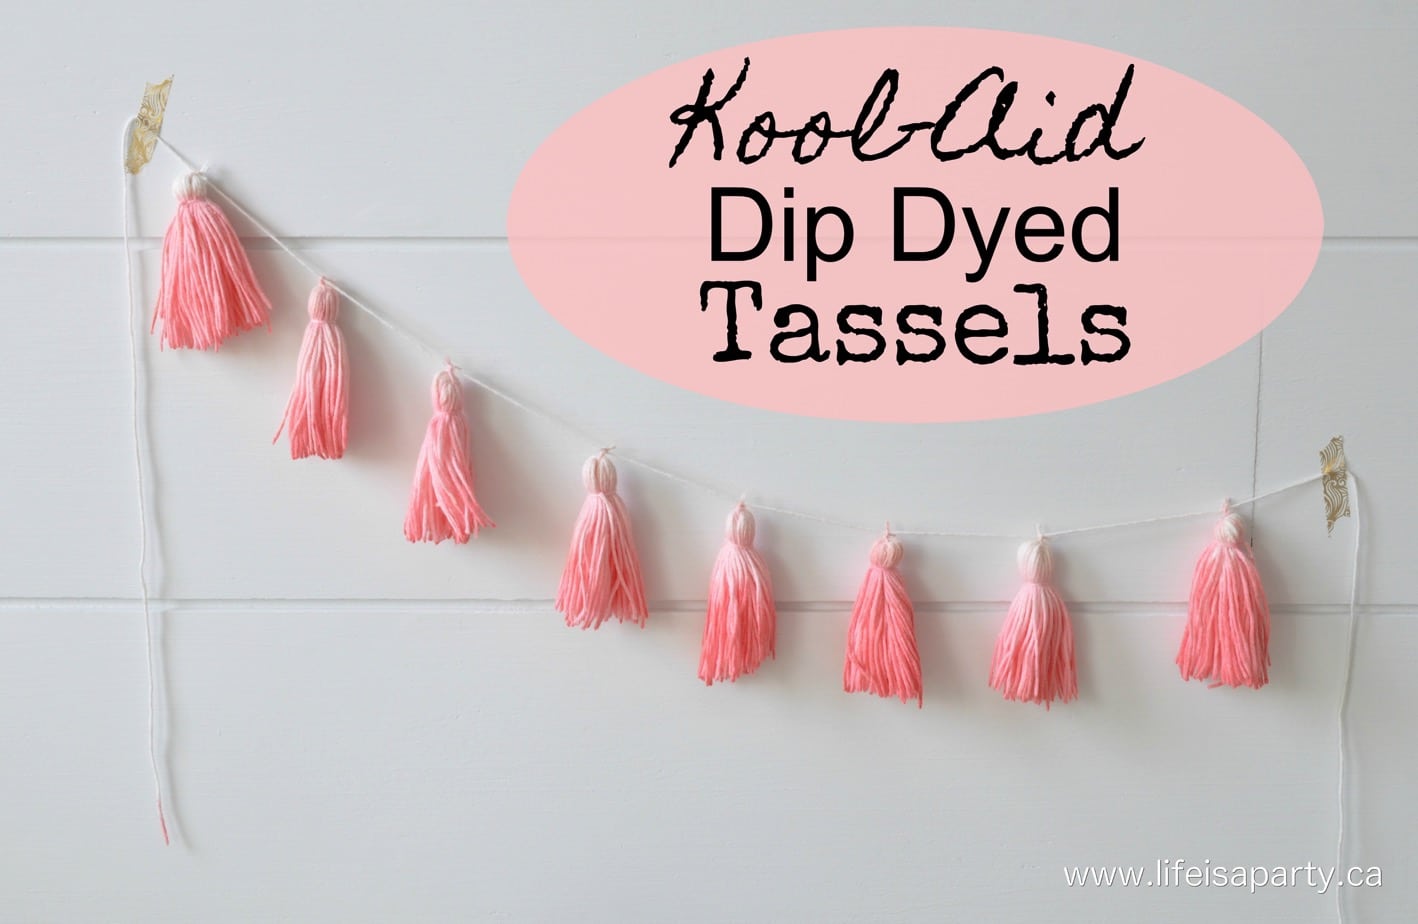 DIY Kool Aid Dip Dyed Tassels: easy, inexpensive, and non-toxic way to ombre dye your own tassels -perfect party or home decor.